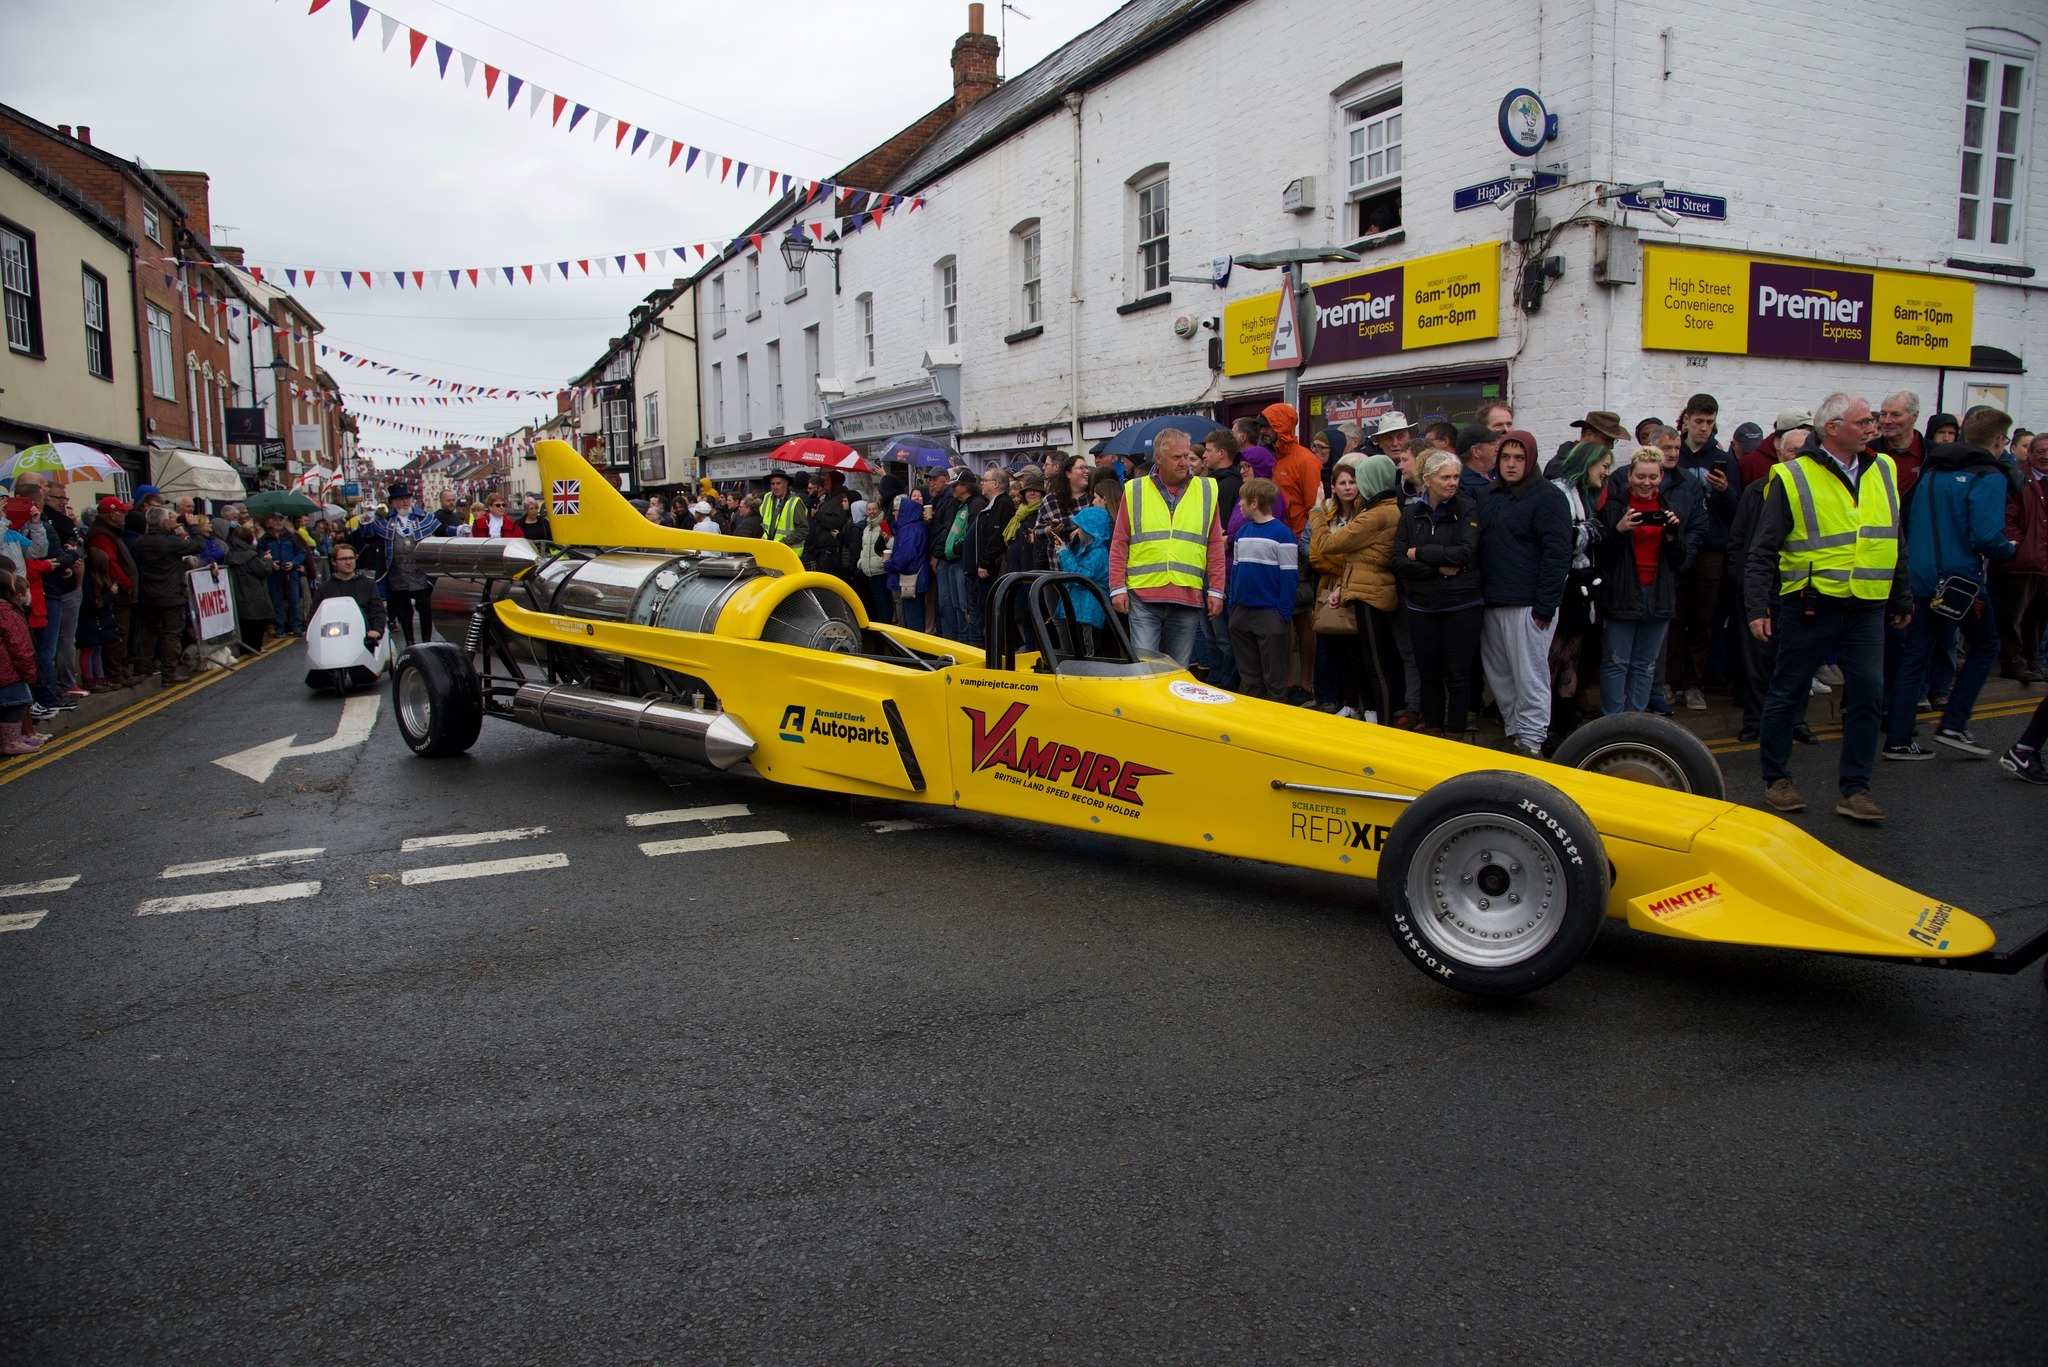 Bromyard Speed Festival 2022: The restored Vampire drafter, which almost killed Richard Hammond in 2006. Picture: Jane Hufton